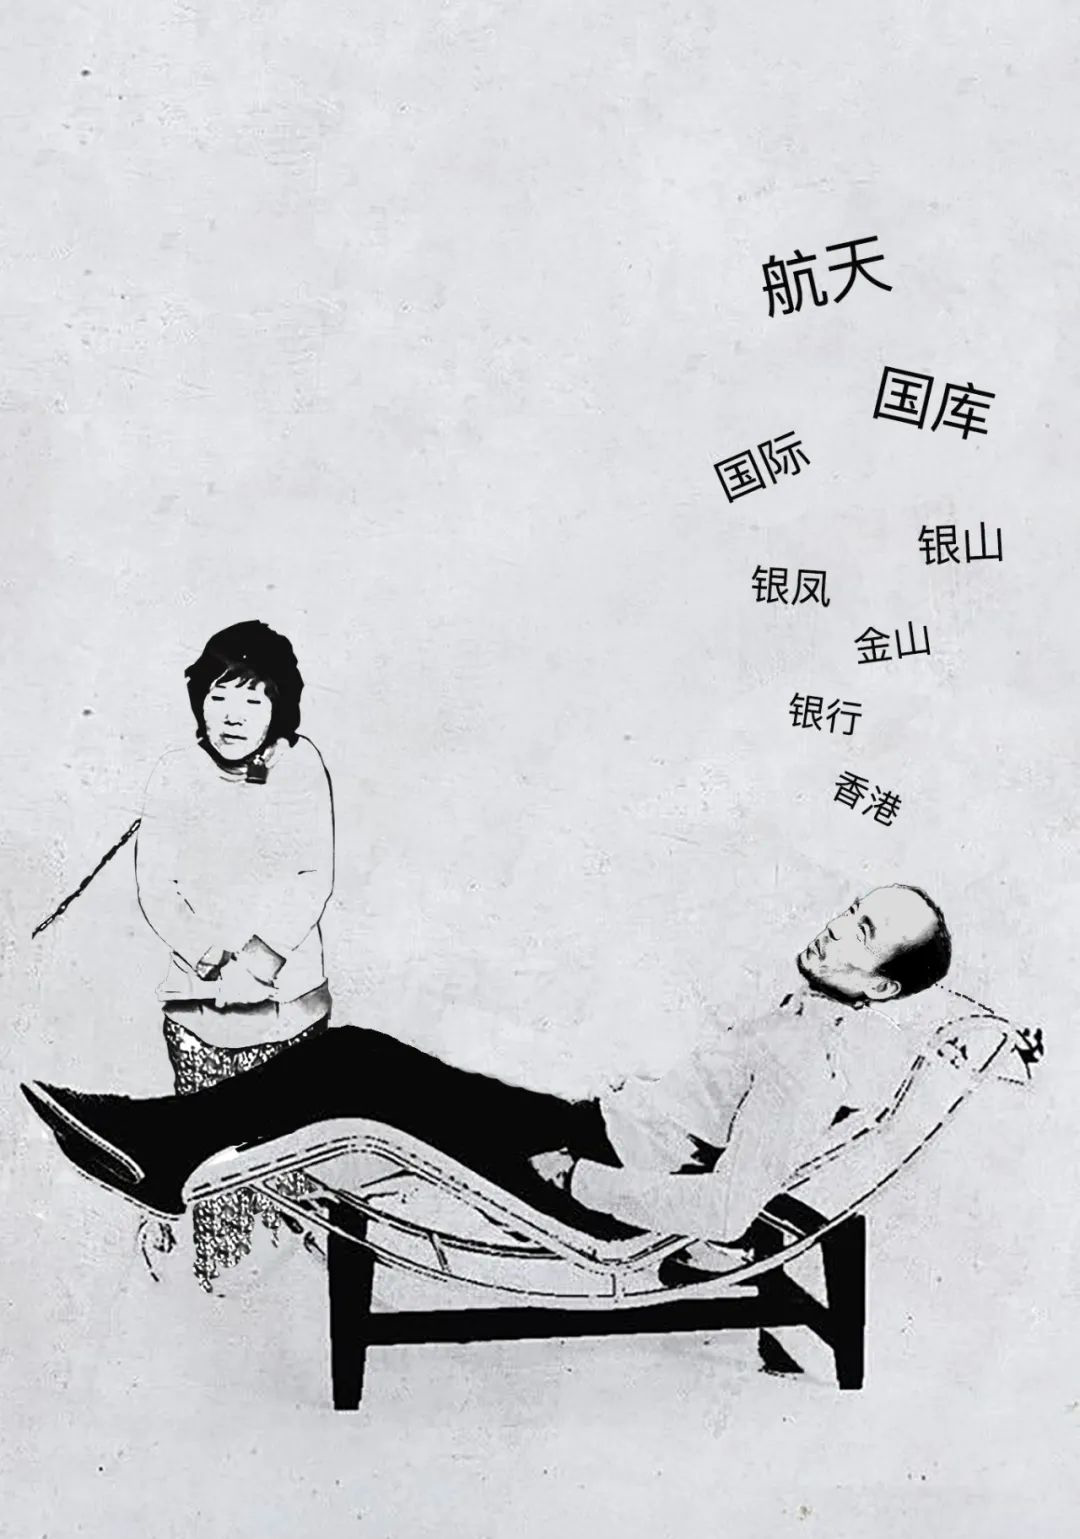 Grey and black stenciled image of Xiaohuamei, standing in chains, with her husband Dong Zhimin, reclining on a chaise lounge, and the (purported) names of their eight children floating above Dong’s head.